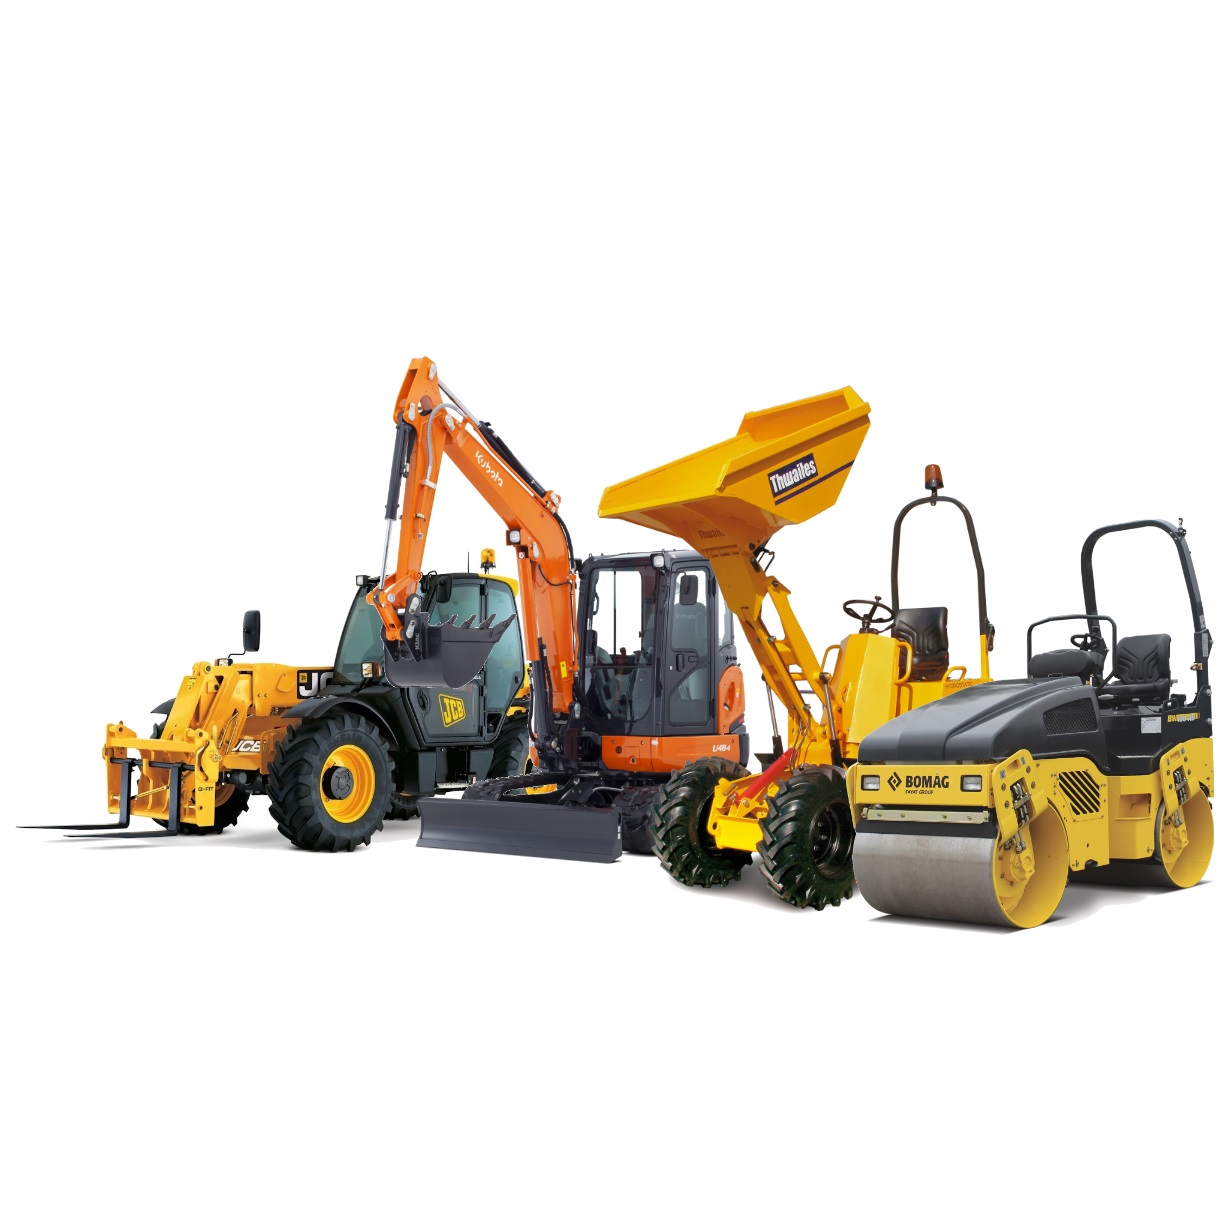 Plant Hire in Guildford